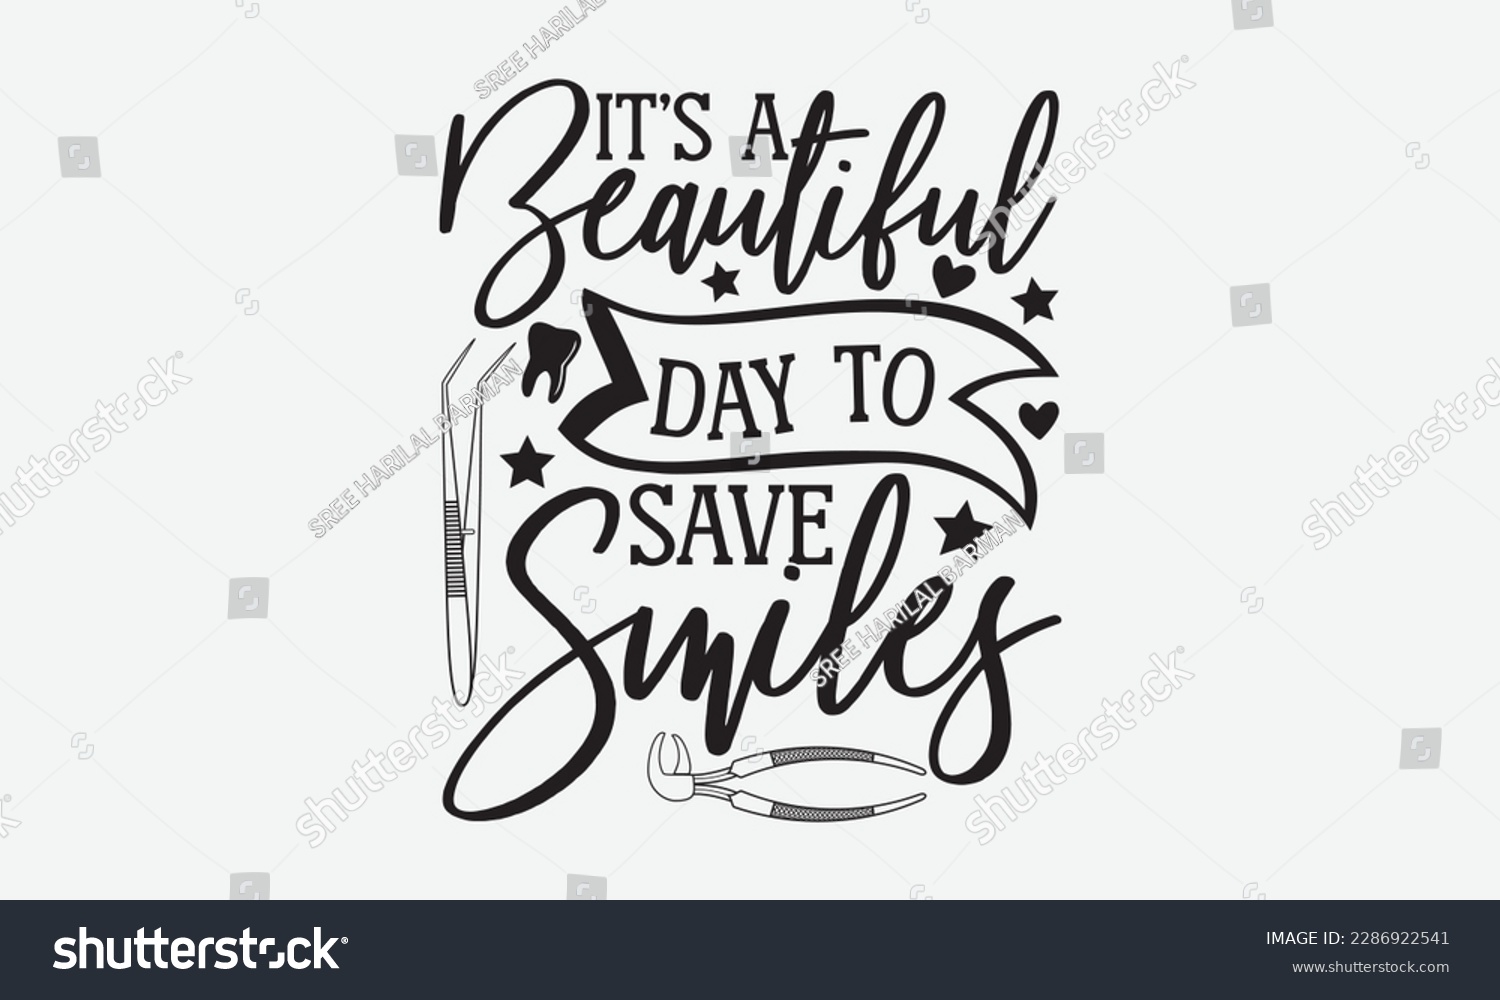 SVG of It’s A Beautiful Day To Save Smiles - Dentist T-shirt Design, Conceptual handwritten phrase craft SVG hand-lettered, Handmade calligraphy vector illustration, template, greeting cards, mugs, brochures svg